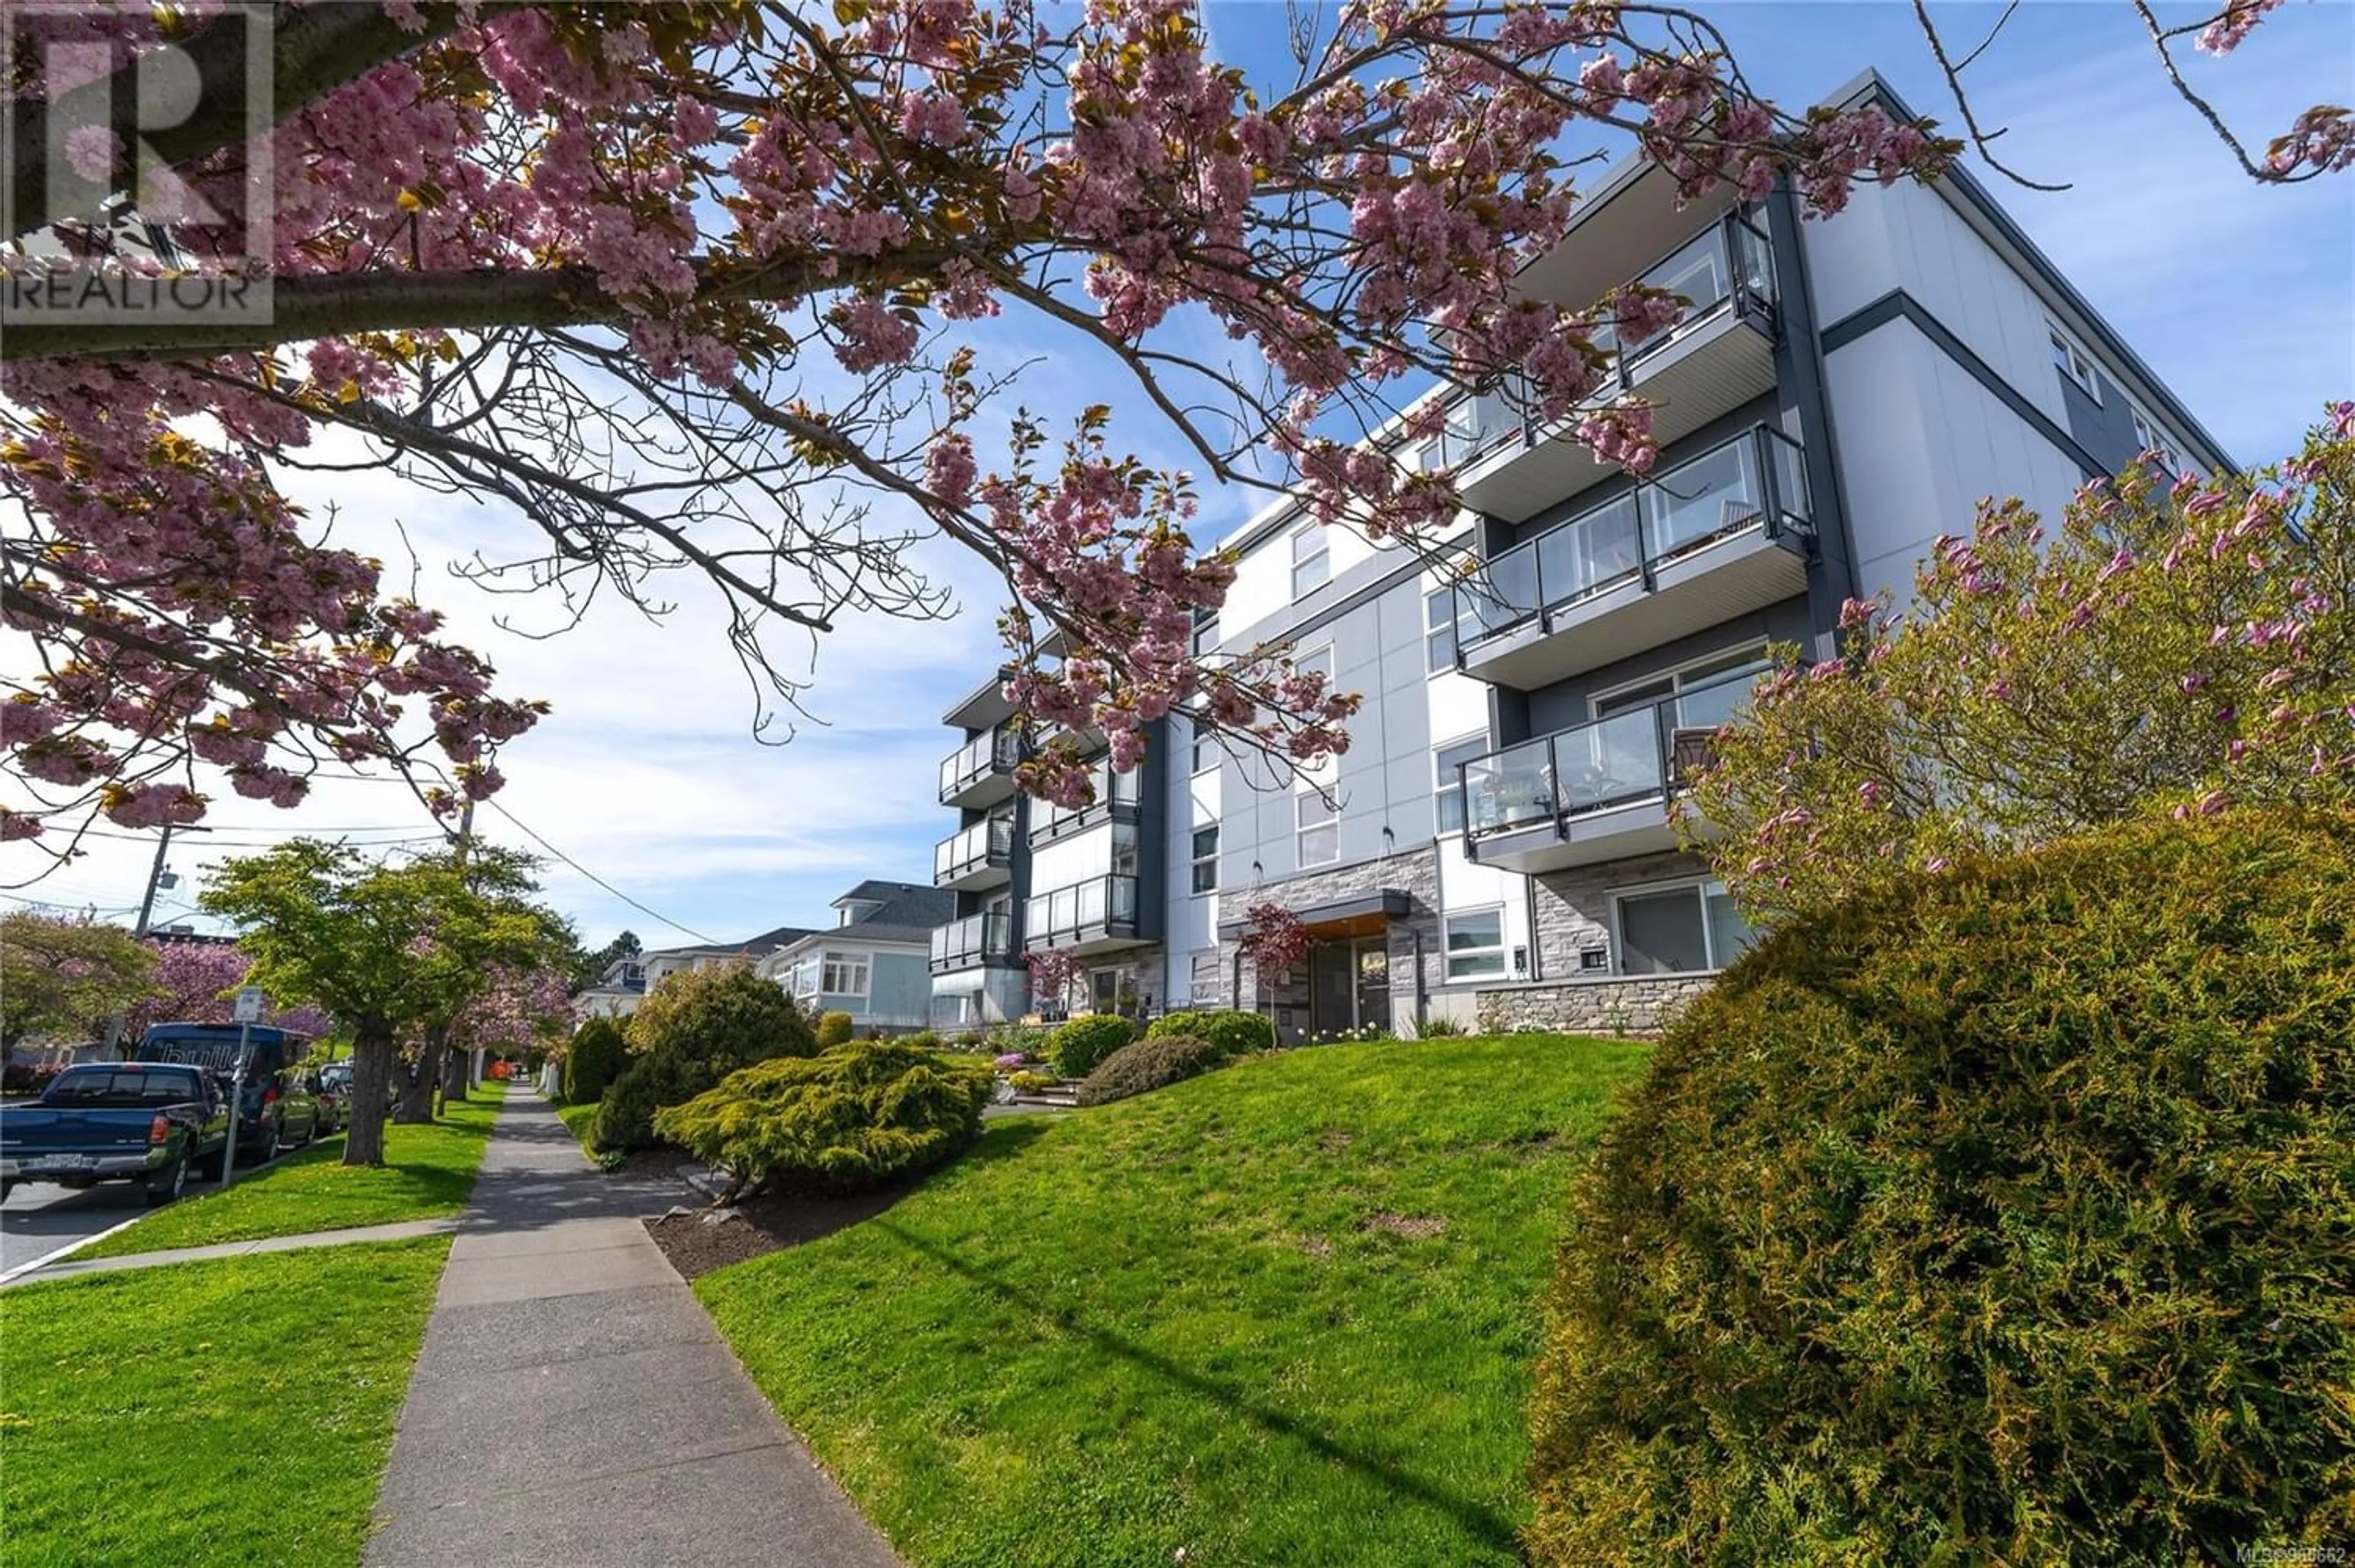 A pic from exterior of the house or condo for 202 1040 Southgate St, Victoria British Columbia V8V2Z2